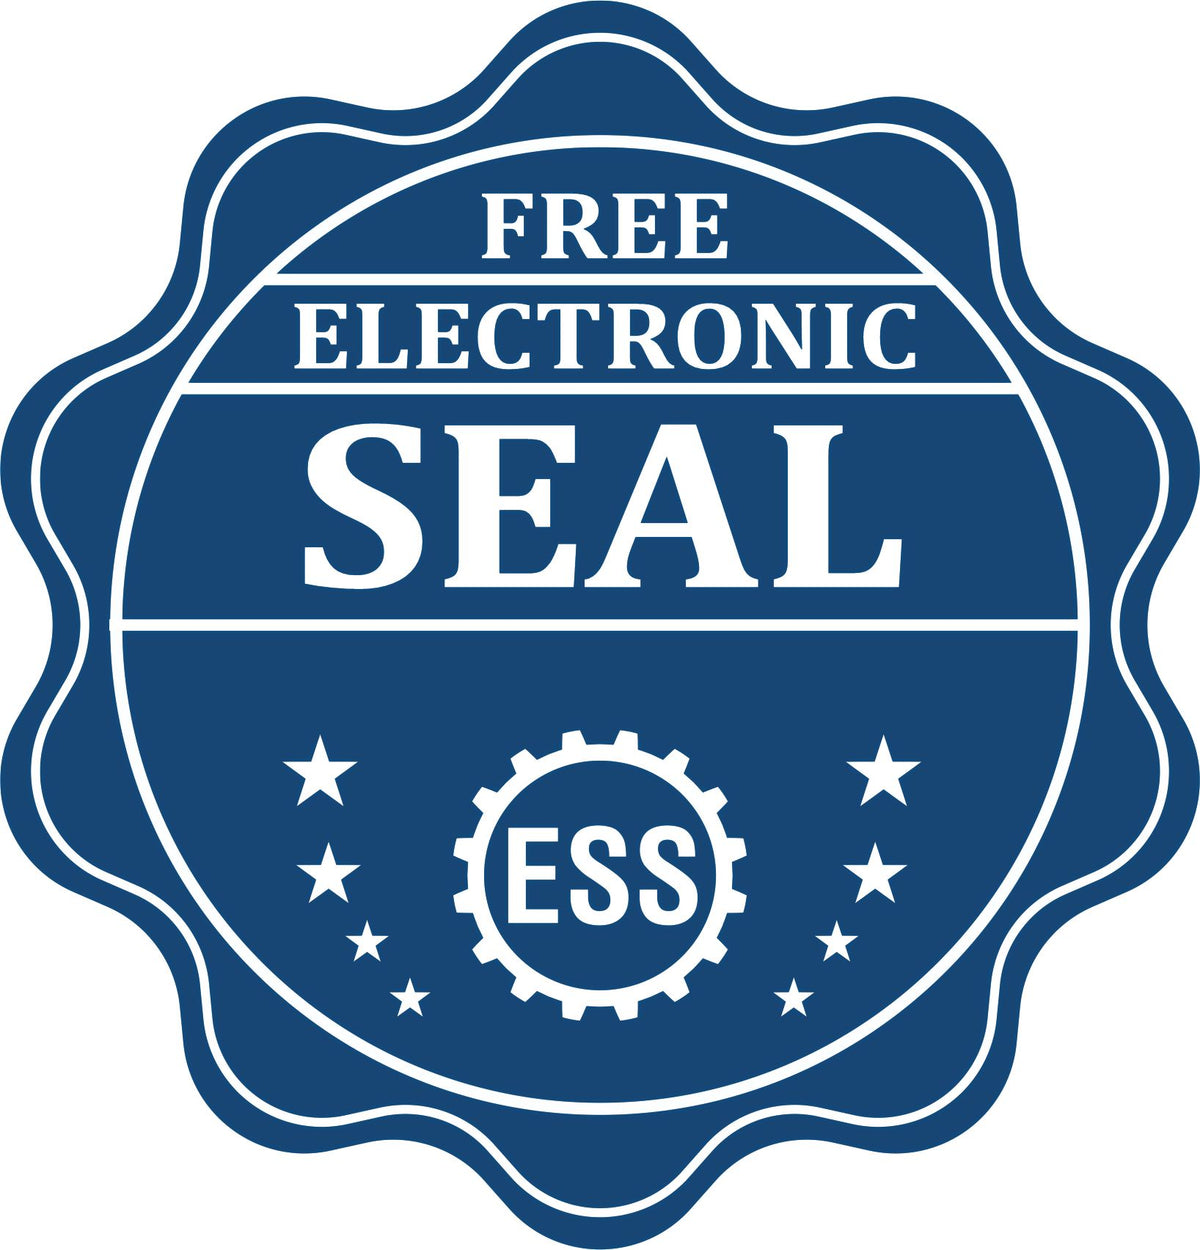 A badge showing a free electronic seal for the Soft Pocket Michigan Landscape Architect Embosser with stars and the ESS gear on the emblem.